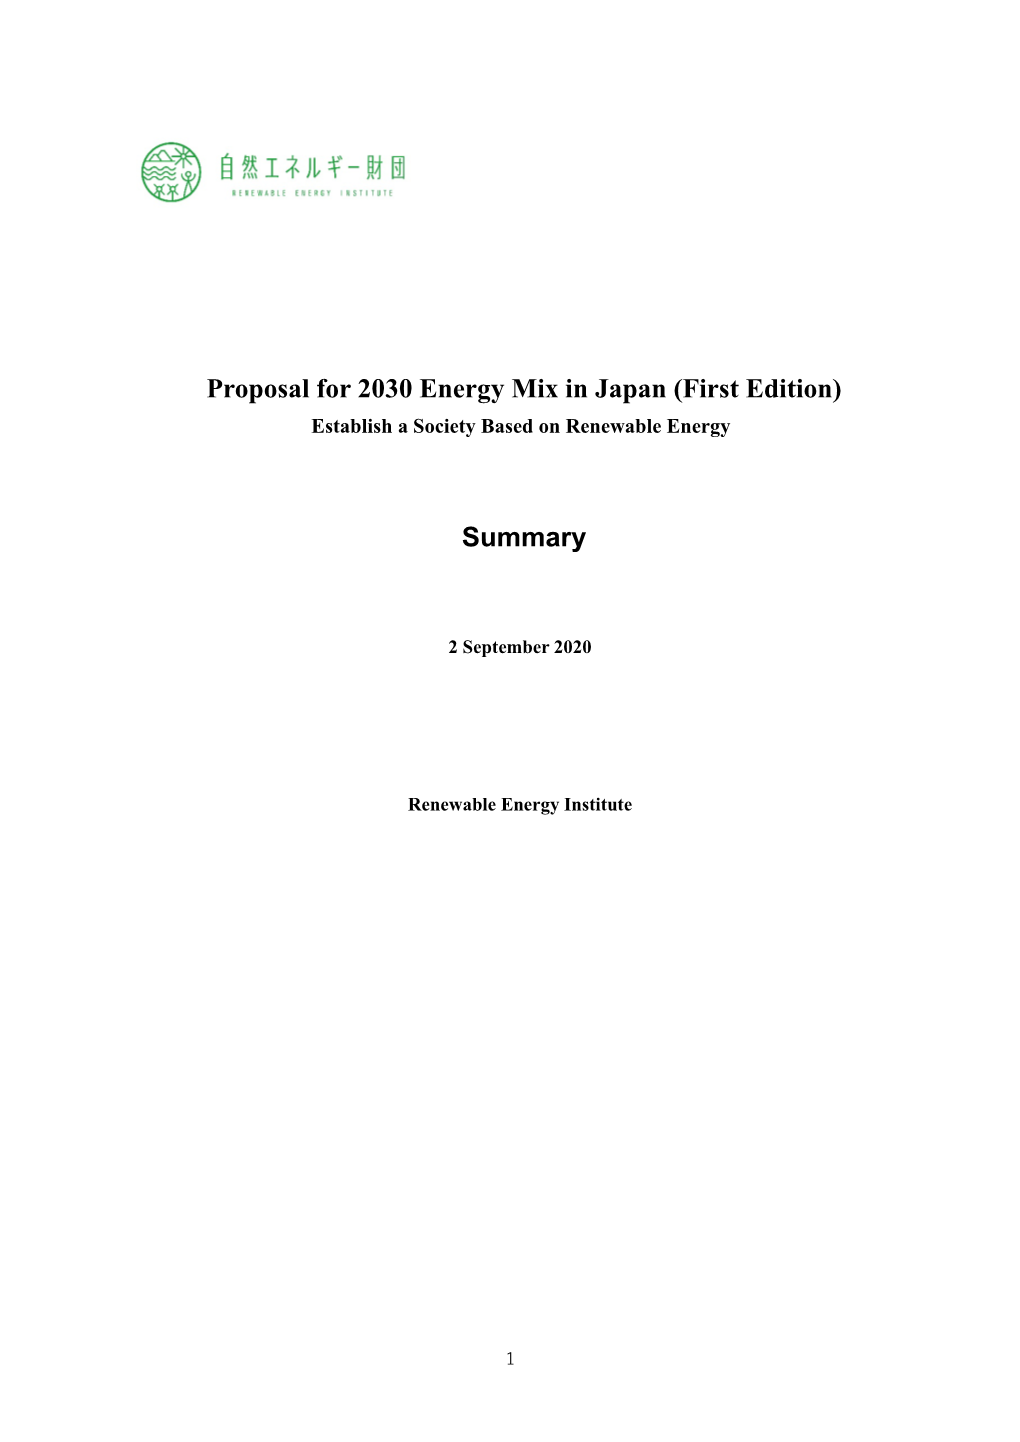 Proposal for 2030 Energy Mix in Japan (First Edition) Establish a Society Based on Renewable Energy